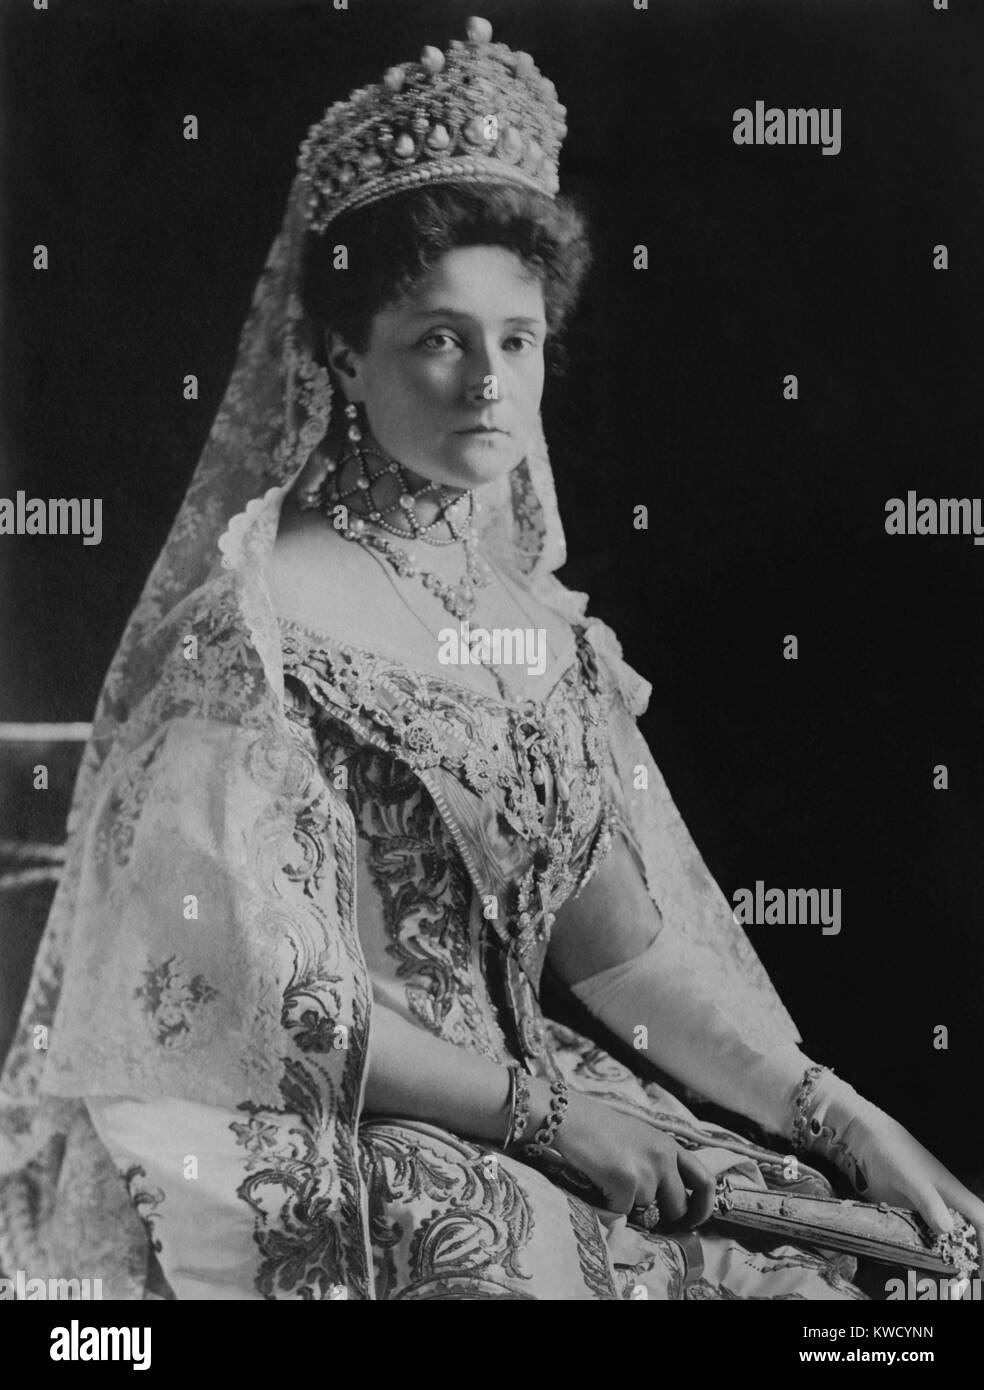 Czarina Alexandra Feodorovna, Alix of Hesse, the Empress Consort of Russia, 1908. Photograph by Frederick Boasson and Fritz Eggler (BSLOC 2017 2 7) Stock Photo